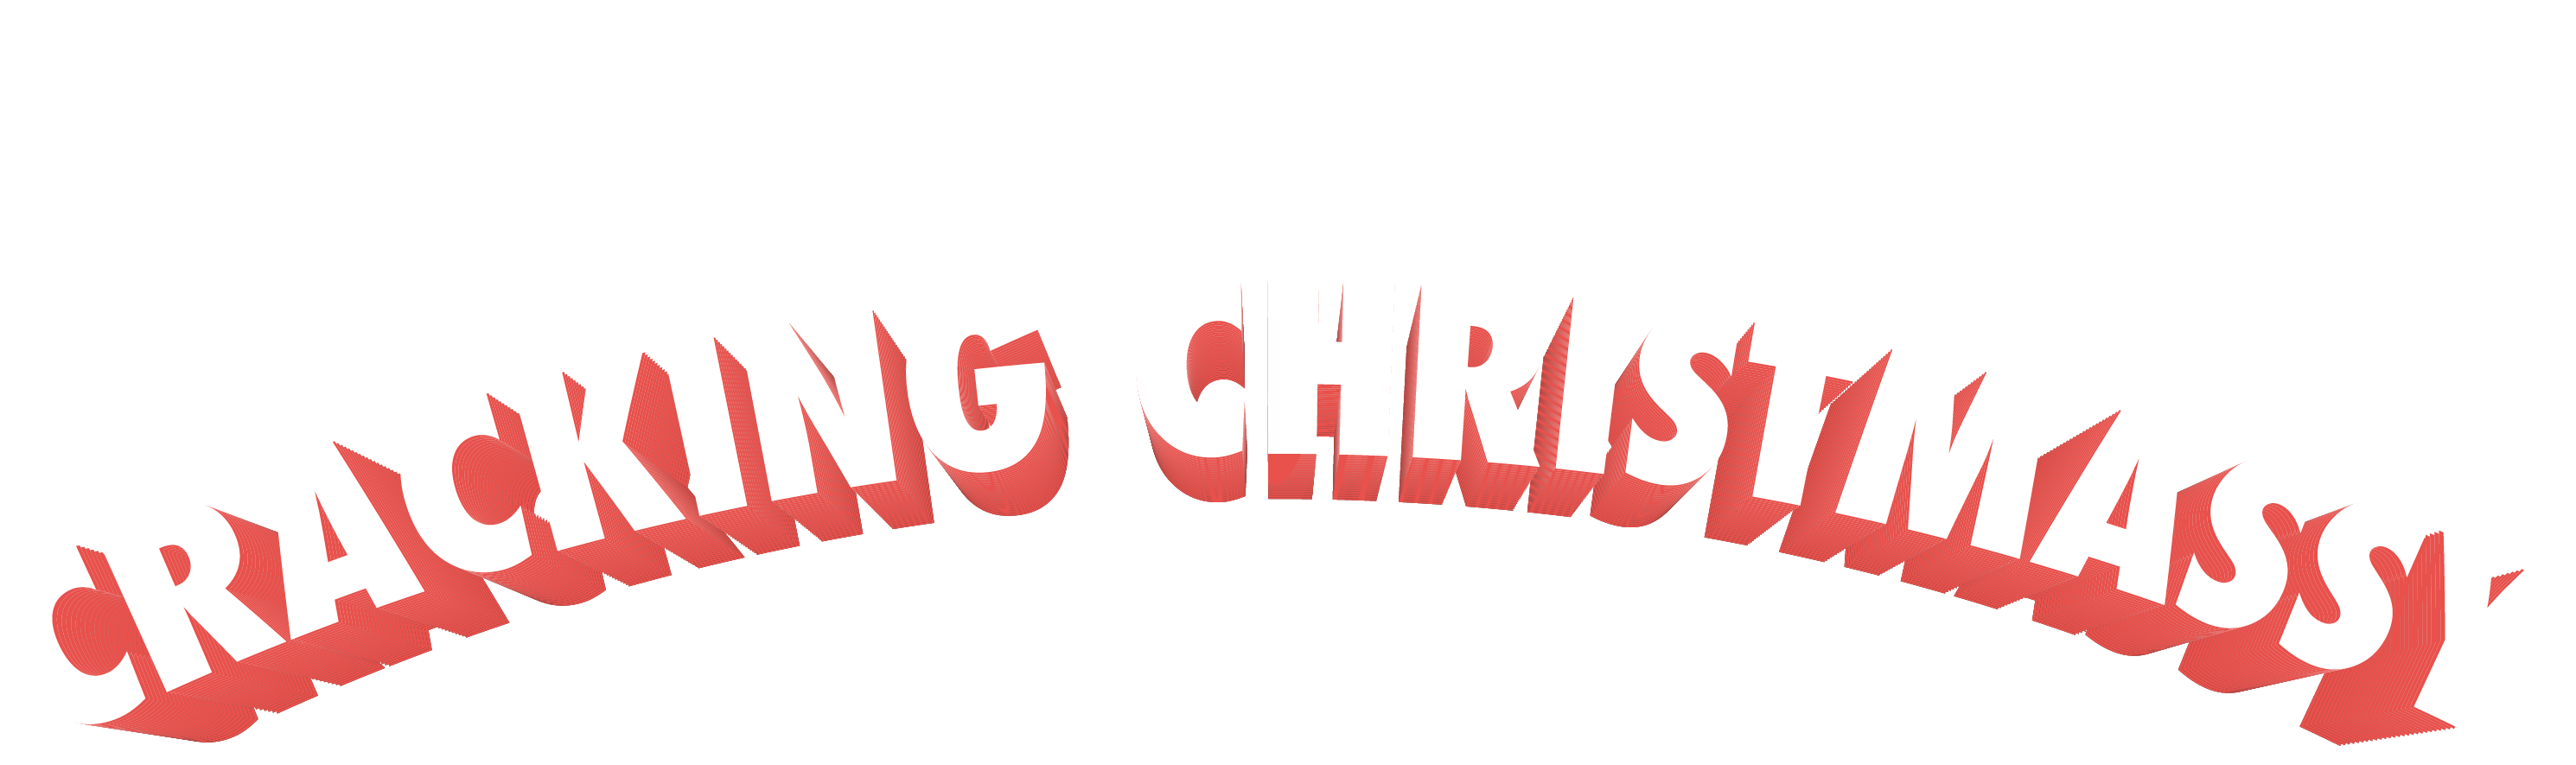 Cracking Christmassy Loaded Chips